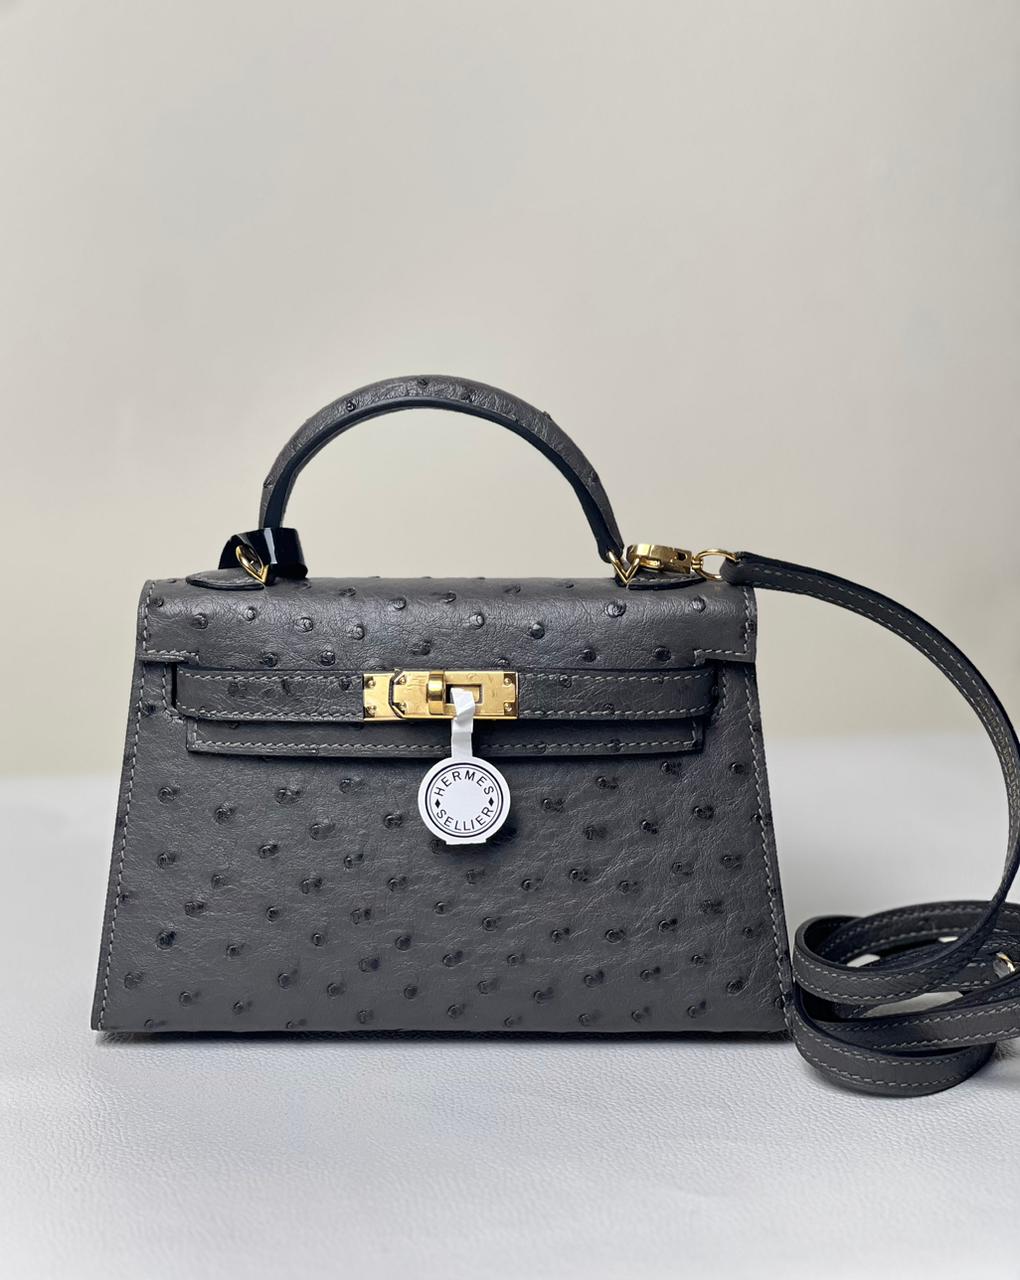 HERMES KELLY 20 OSTRICH SELLIER Handbag in Terre Cuitte With Palladium